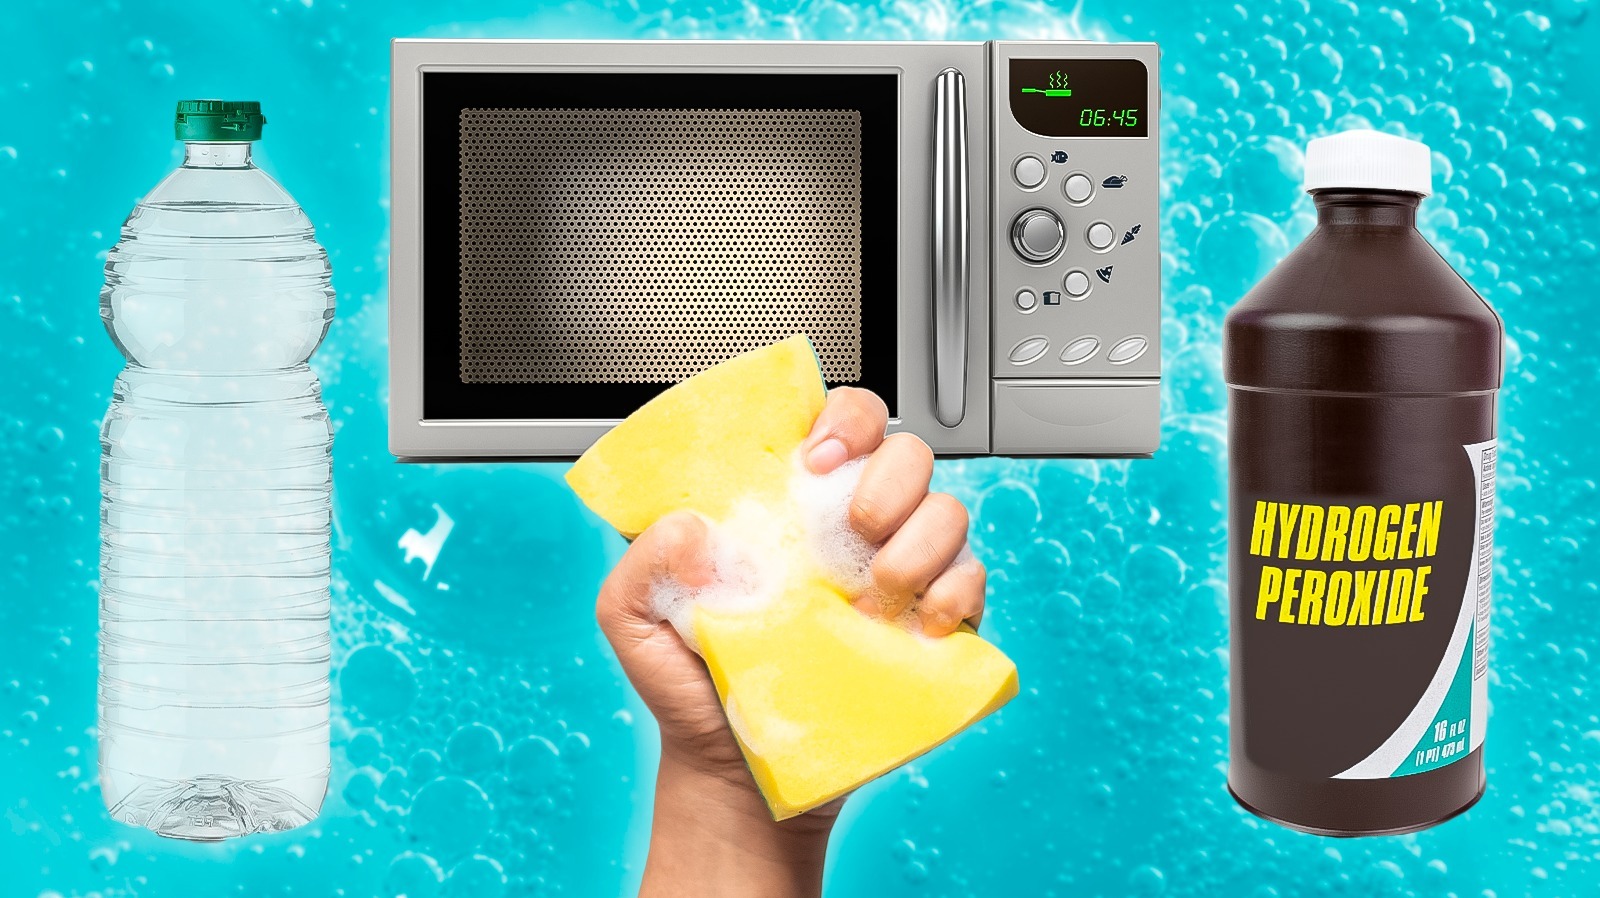 How To Avoid Smelly Sponges In The Kitchen - Methods That Work